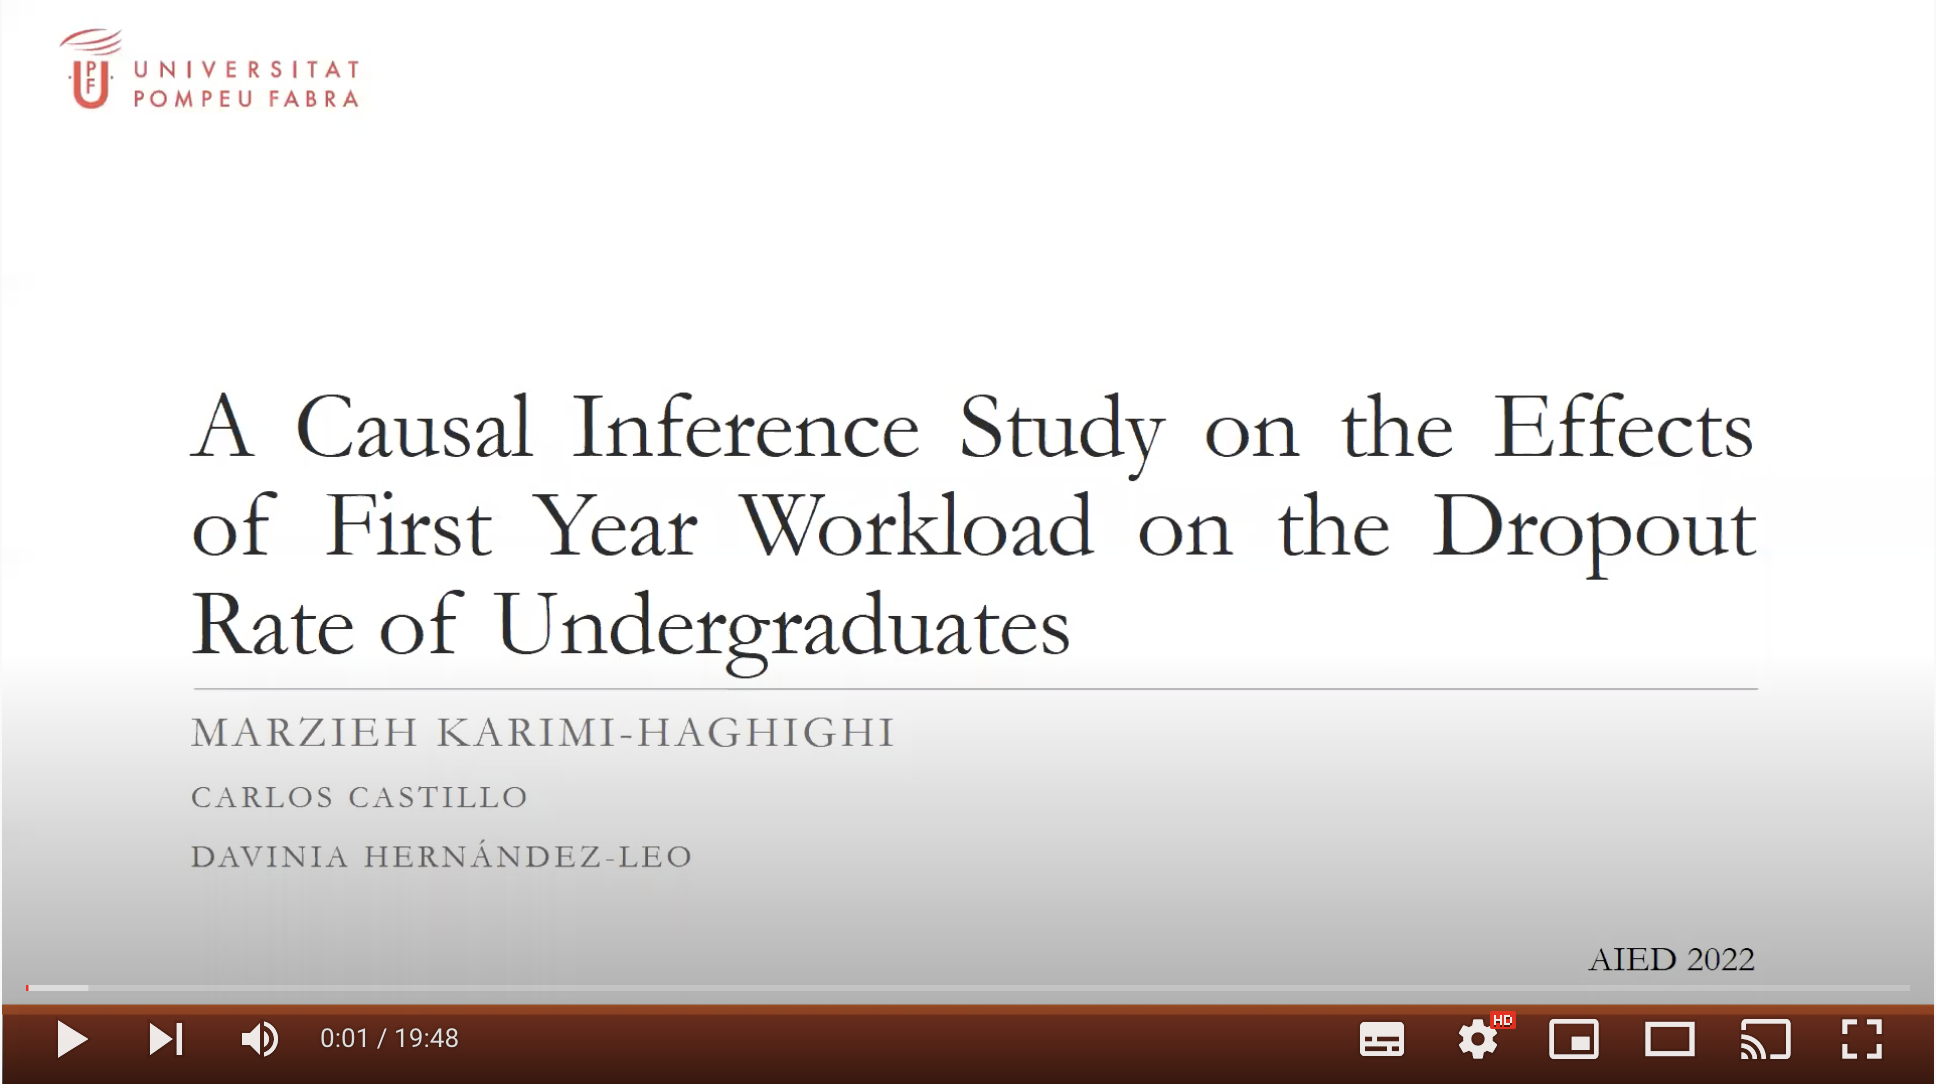 AIED paper: A Causal Inference Study on the Effects of First Year Workload on the Dropout Rate of Undergraduates